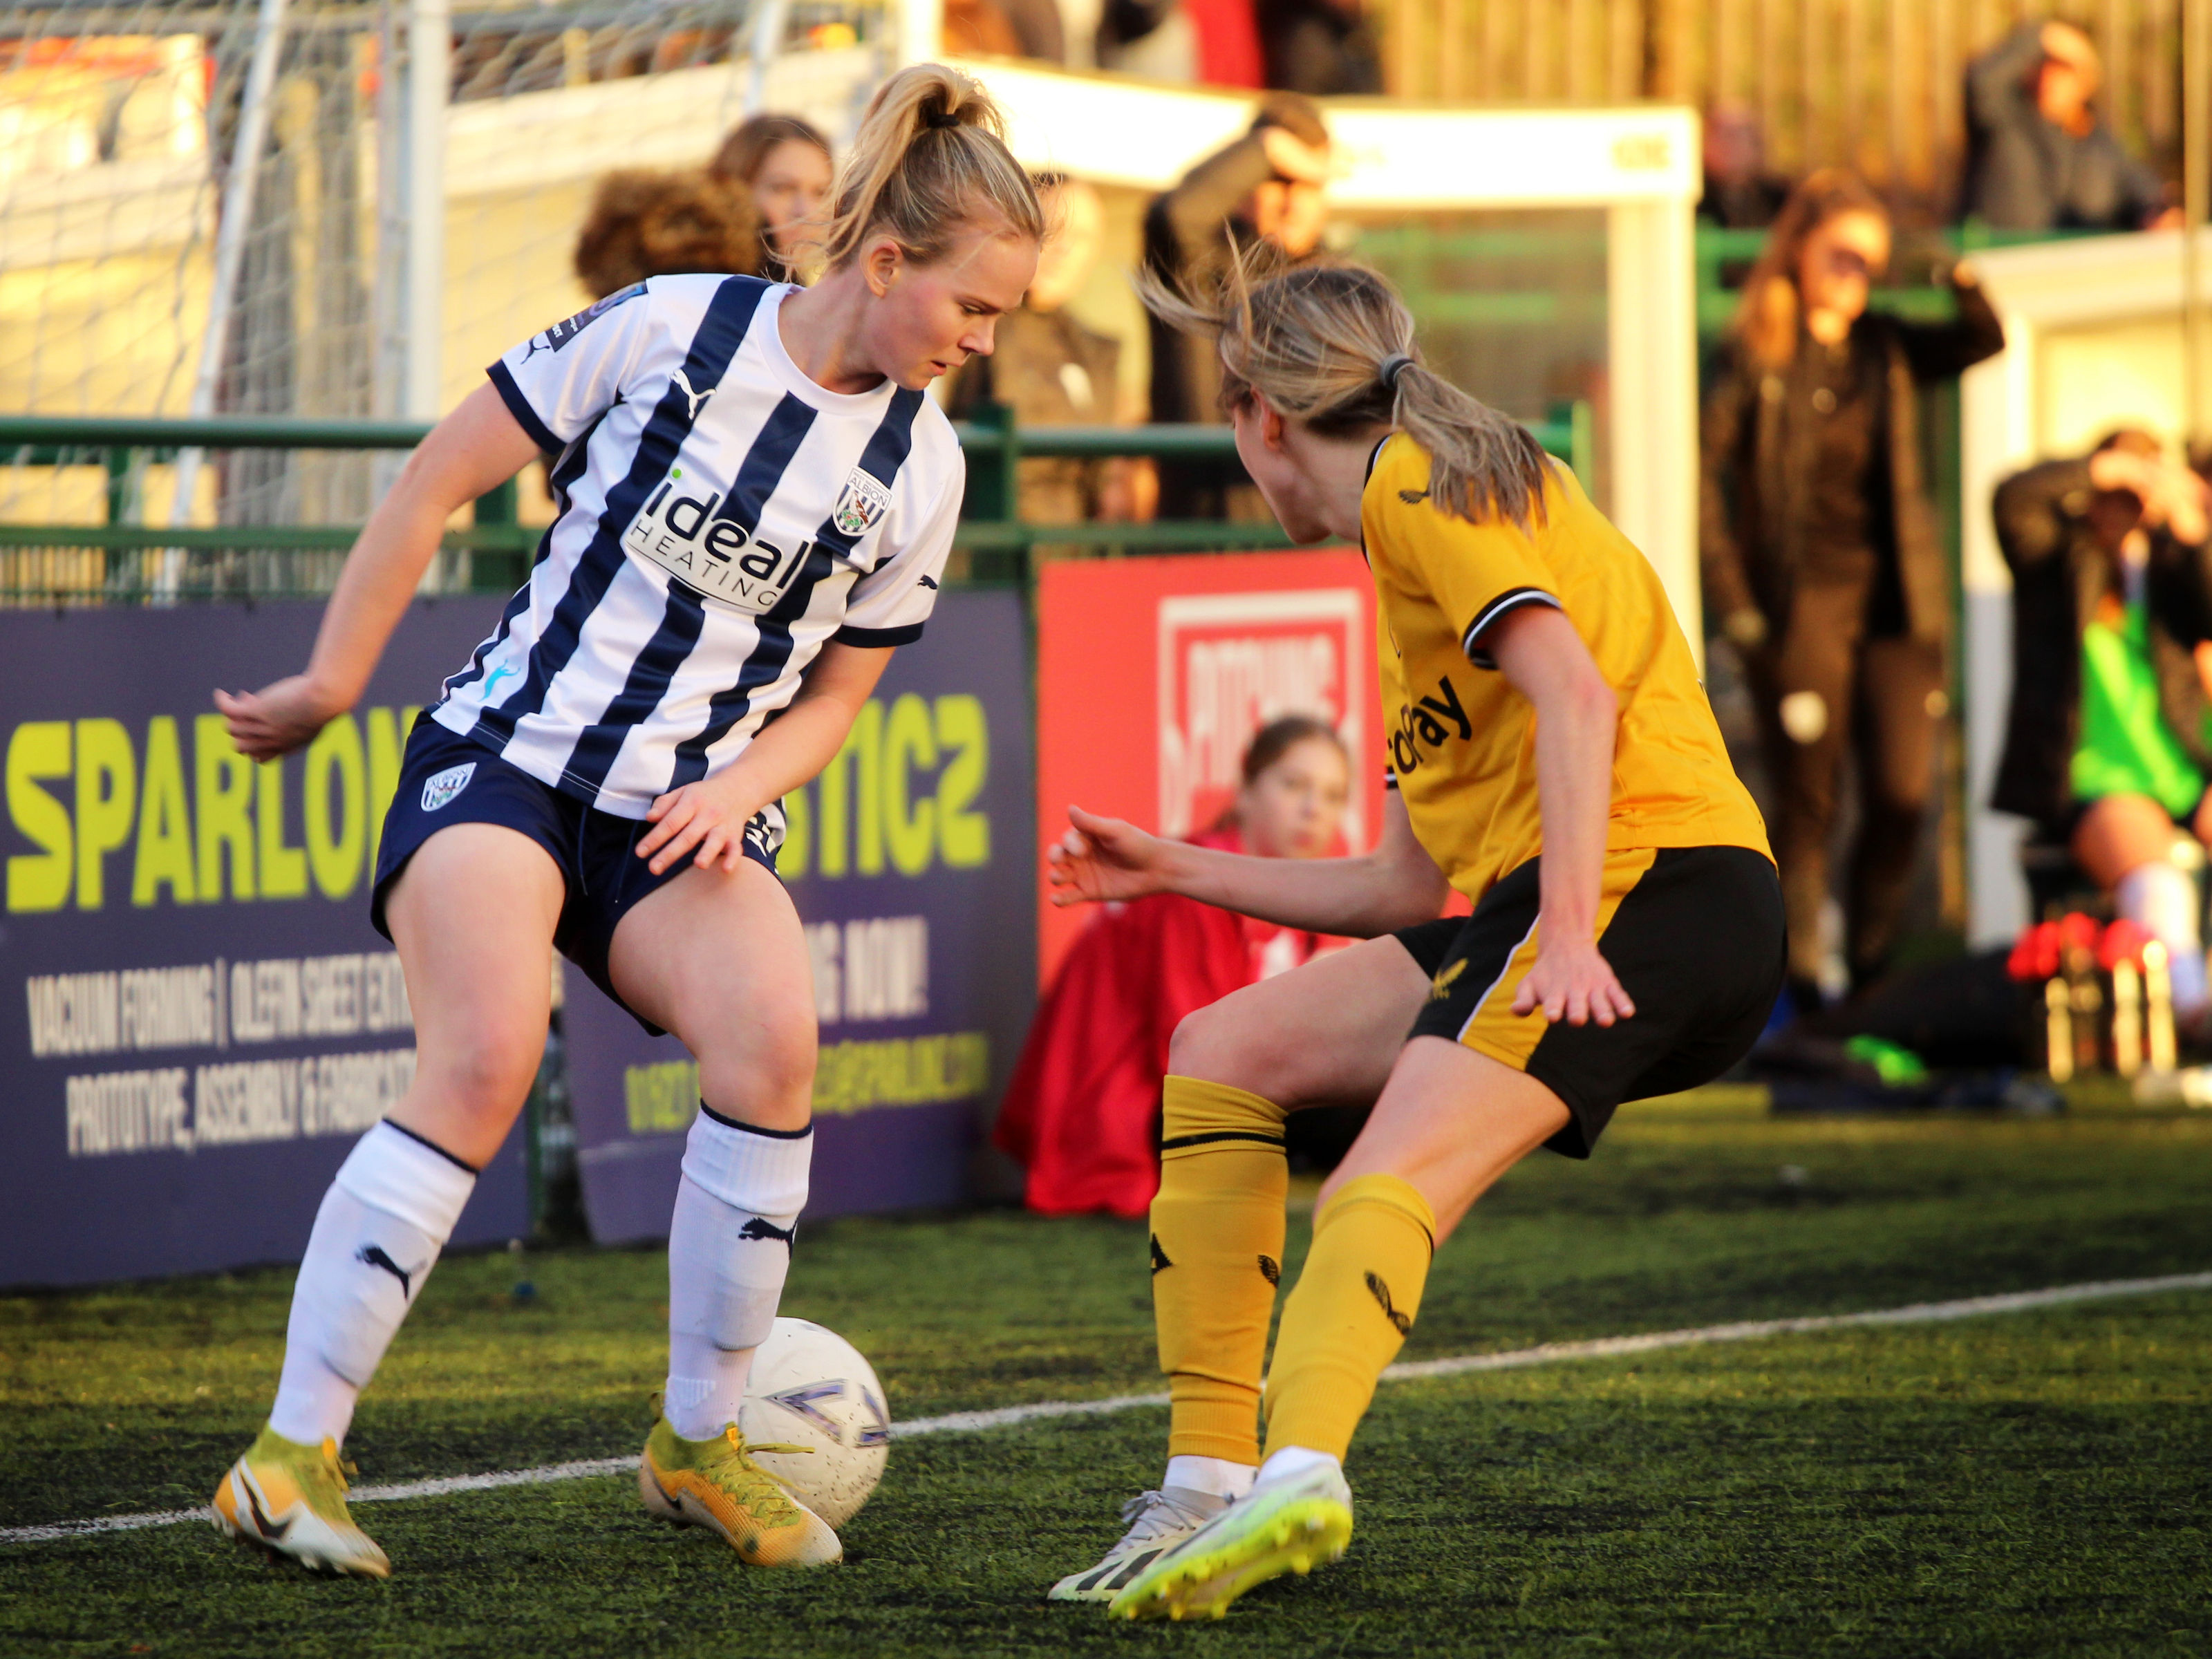 A photo of Albion Women's player Phoebe Warner in action against Wolves